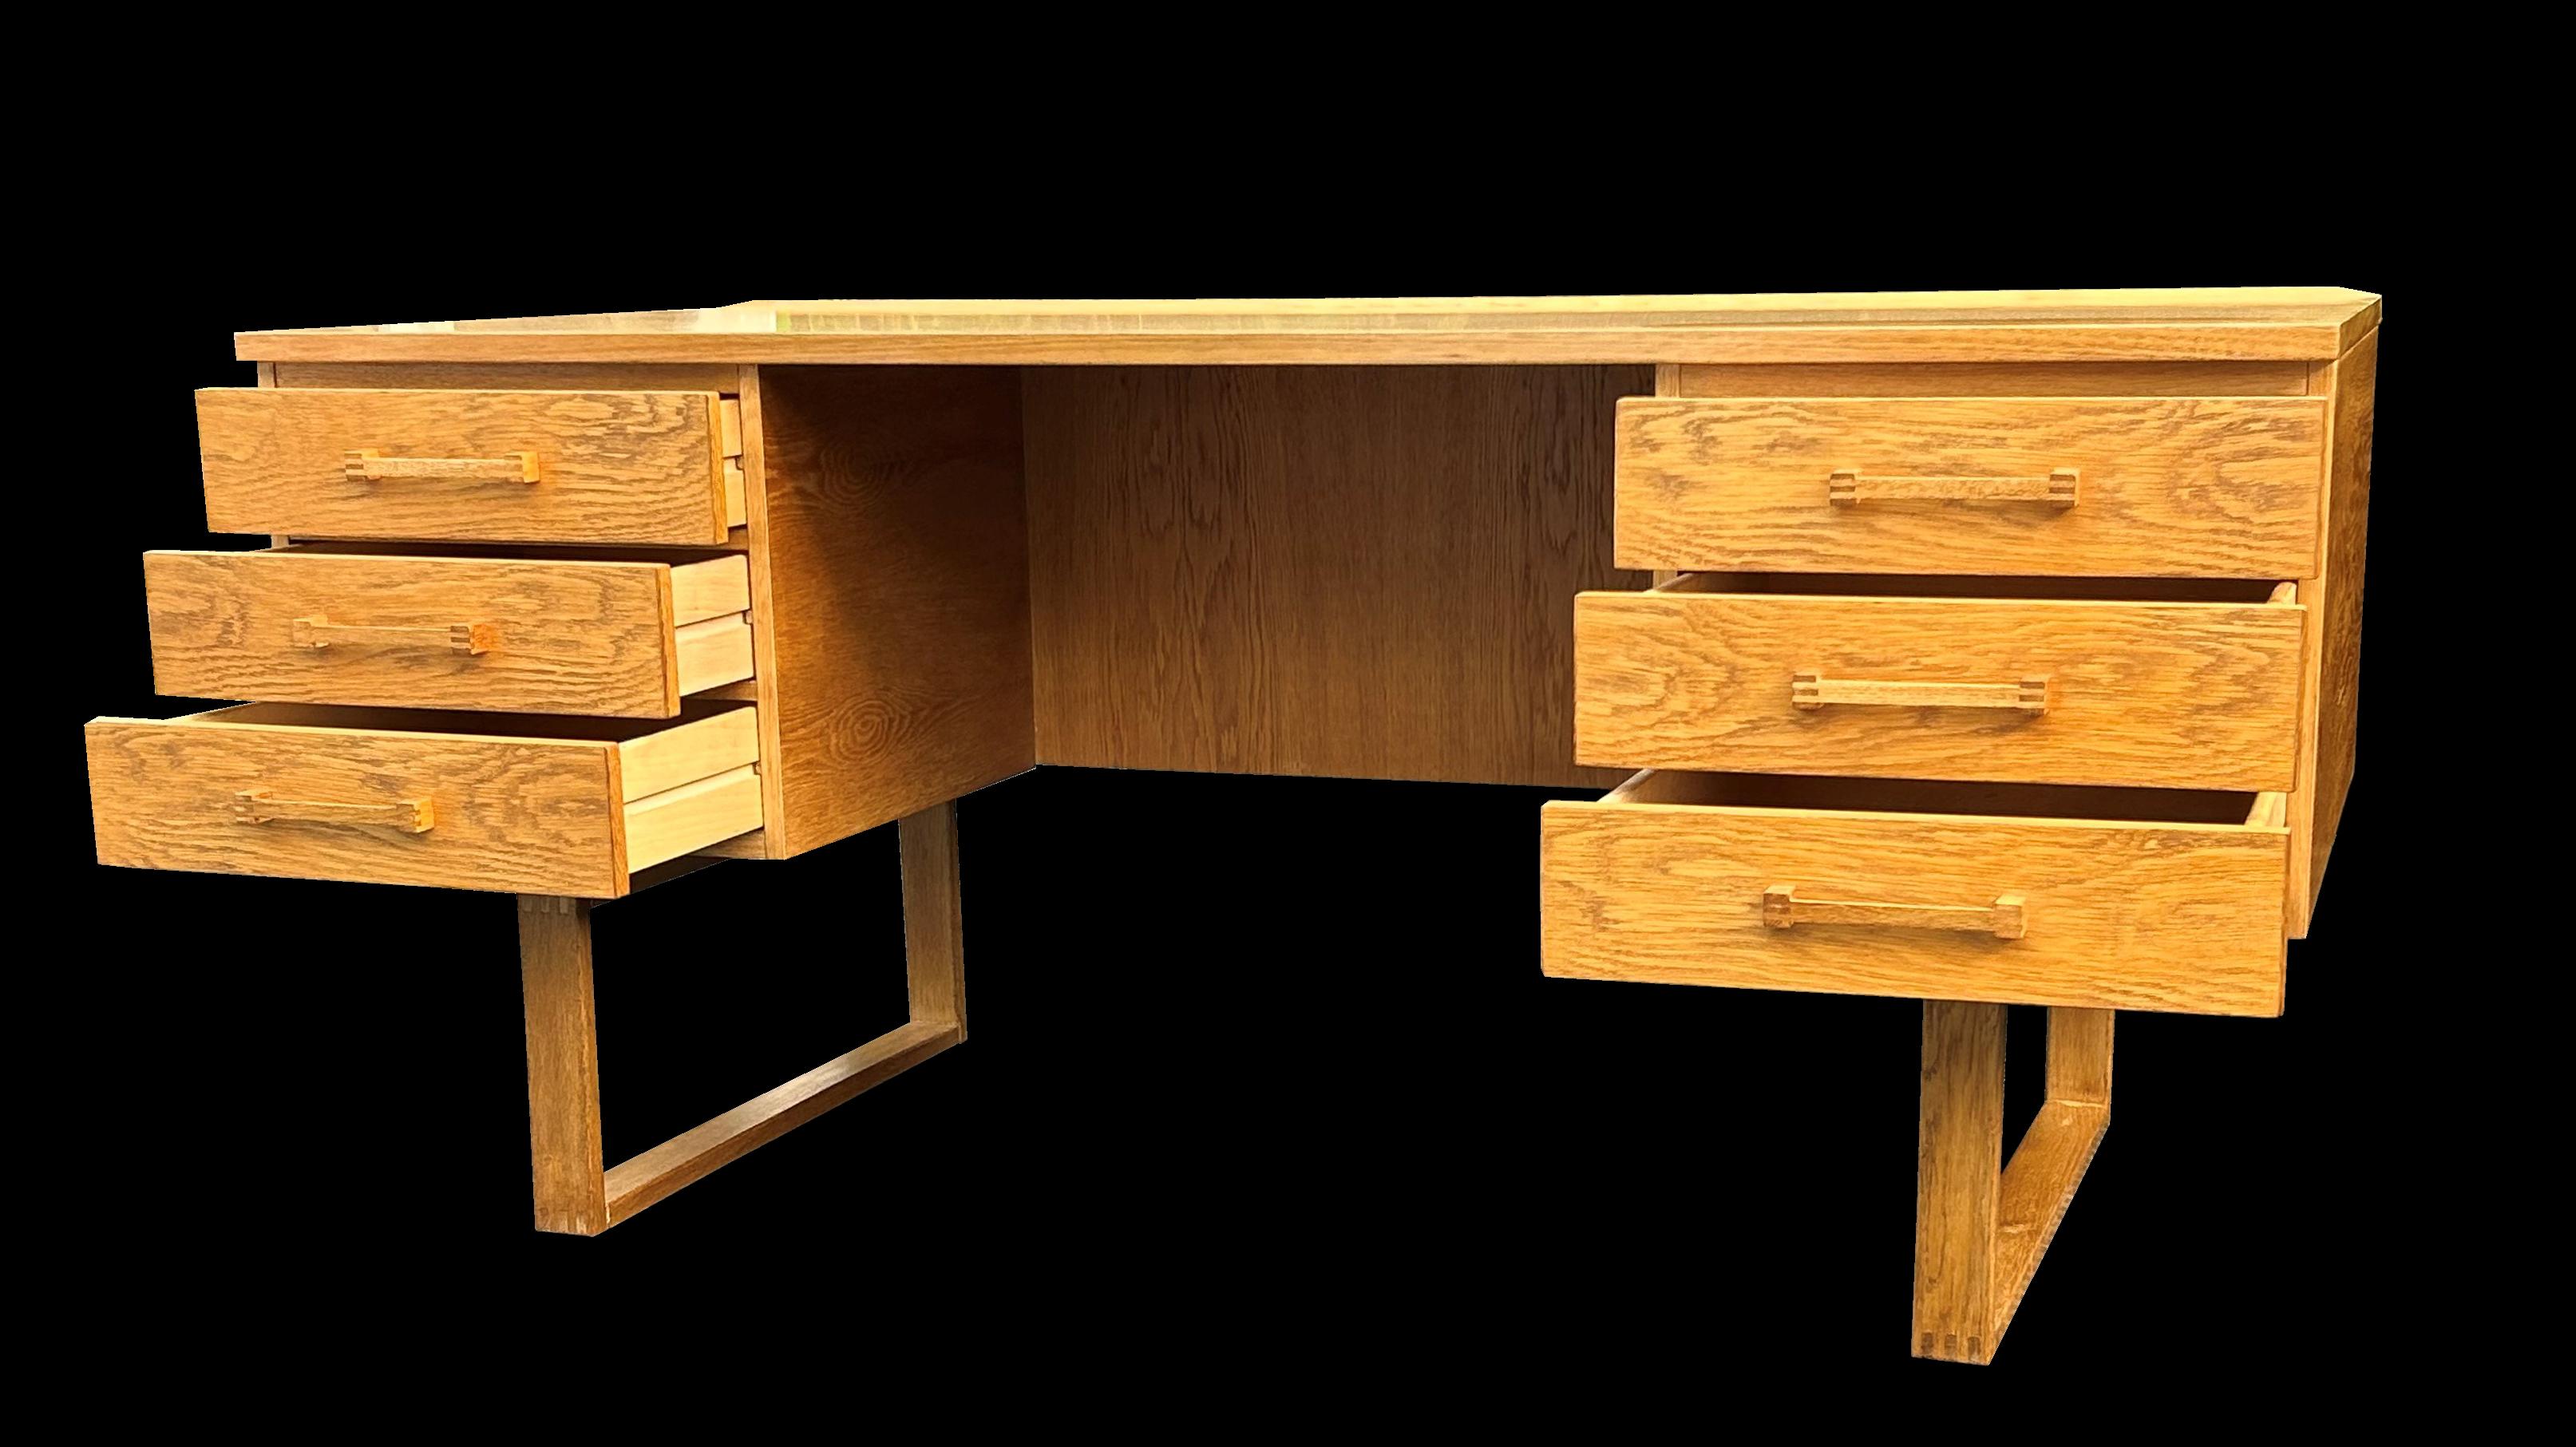 A very nice example of this very popular midcentury desk, this one unusually in Oak, perfect for any home or work office in the Scandinavian Modern style.